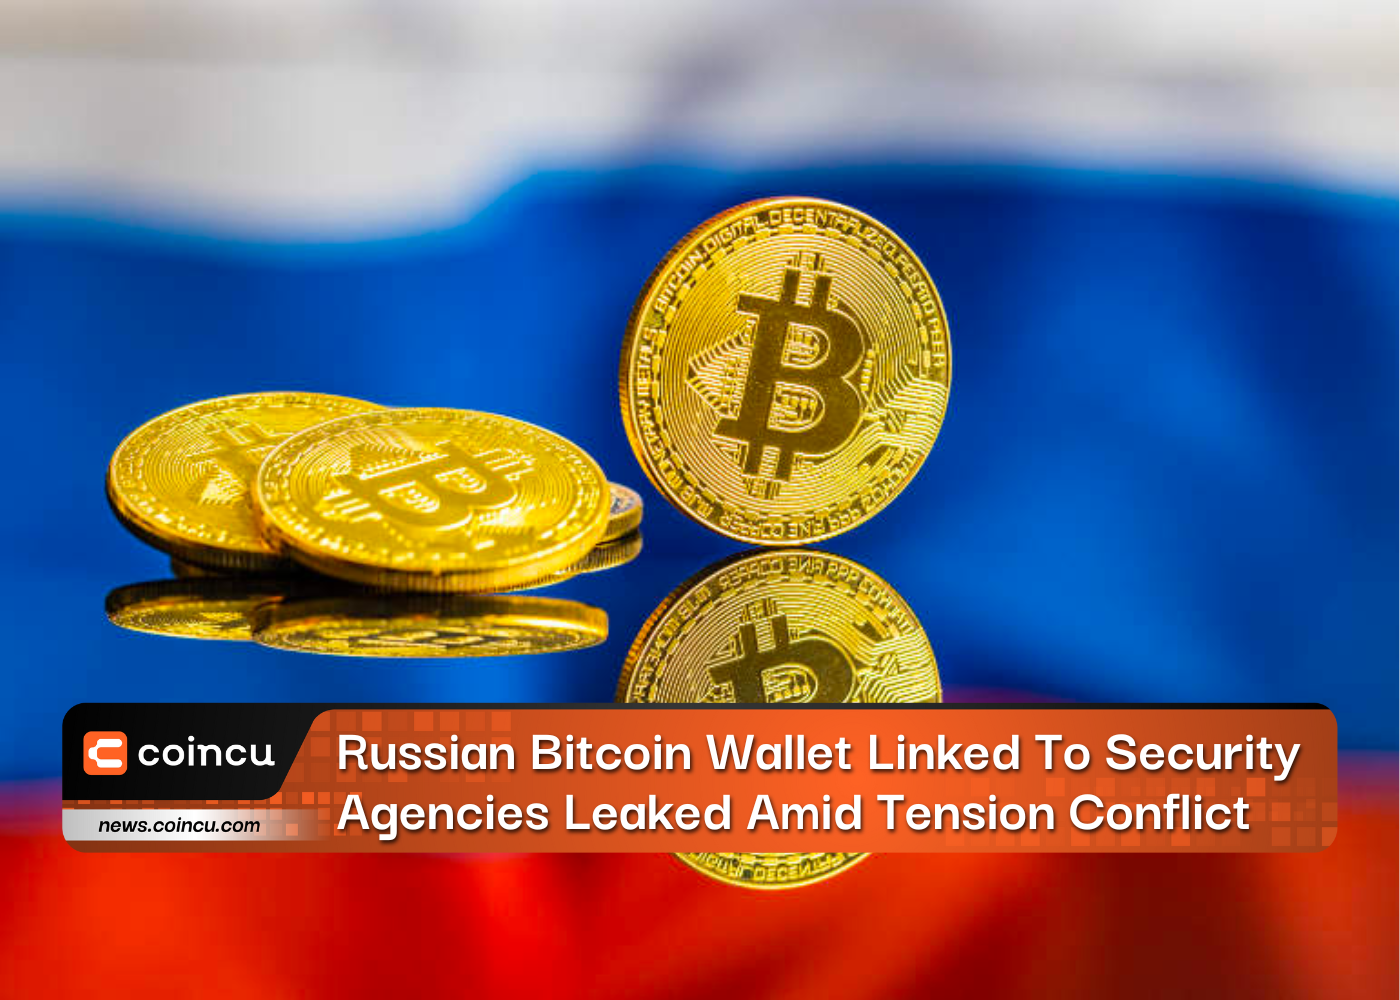 Russian Bitcoin Wallet Linked To Security Agencies Leaked Amid Tension Conflict